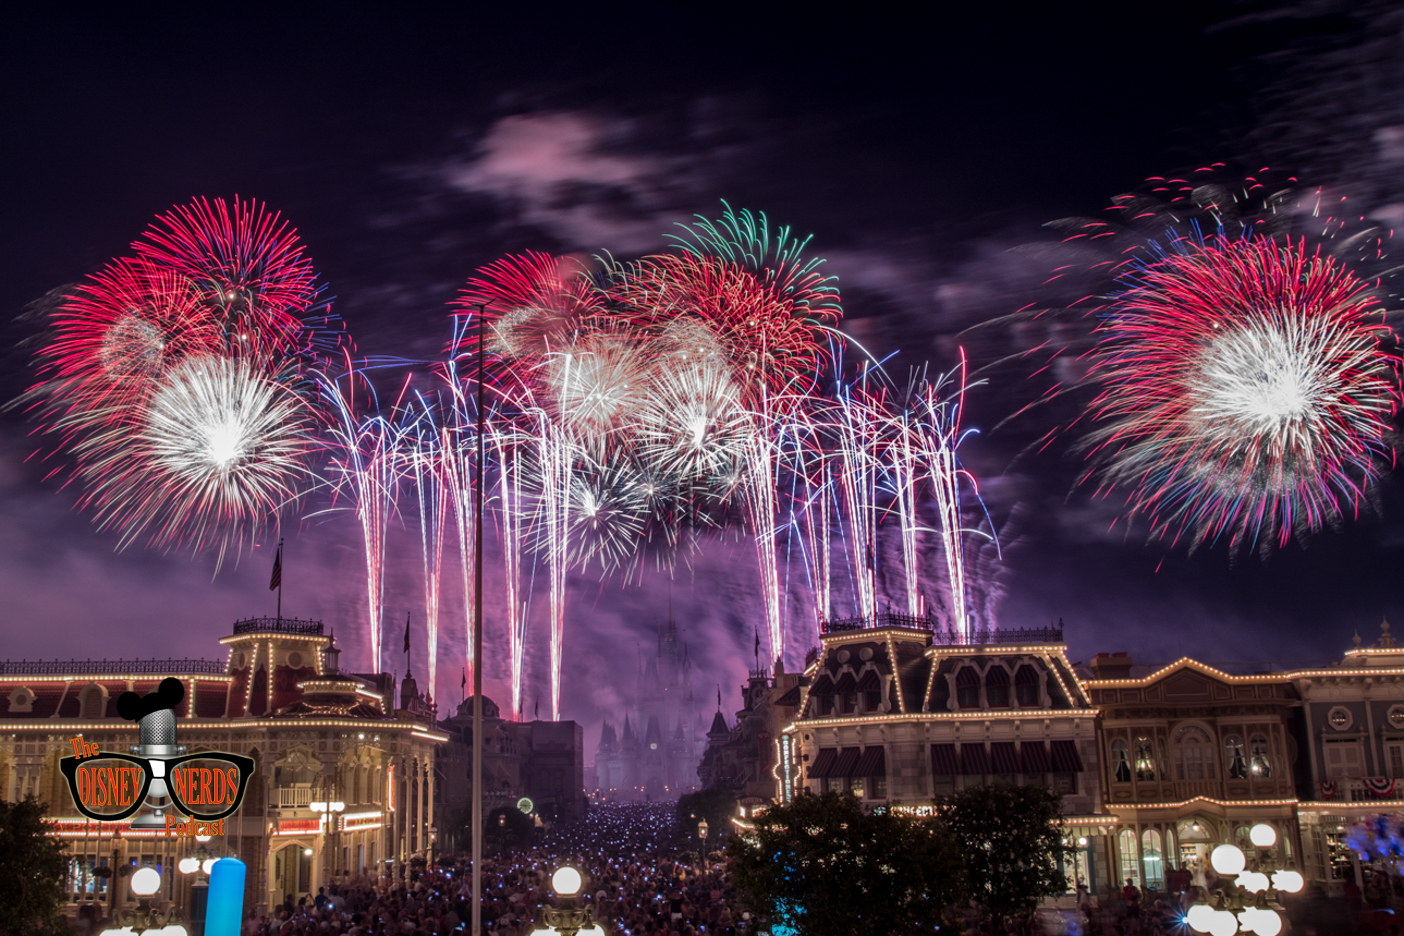 Watch The New Year’s Fireworks Show Live TONIGHT from Magic Kingdom